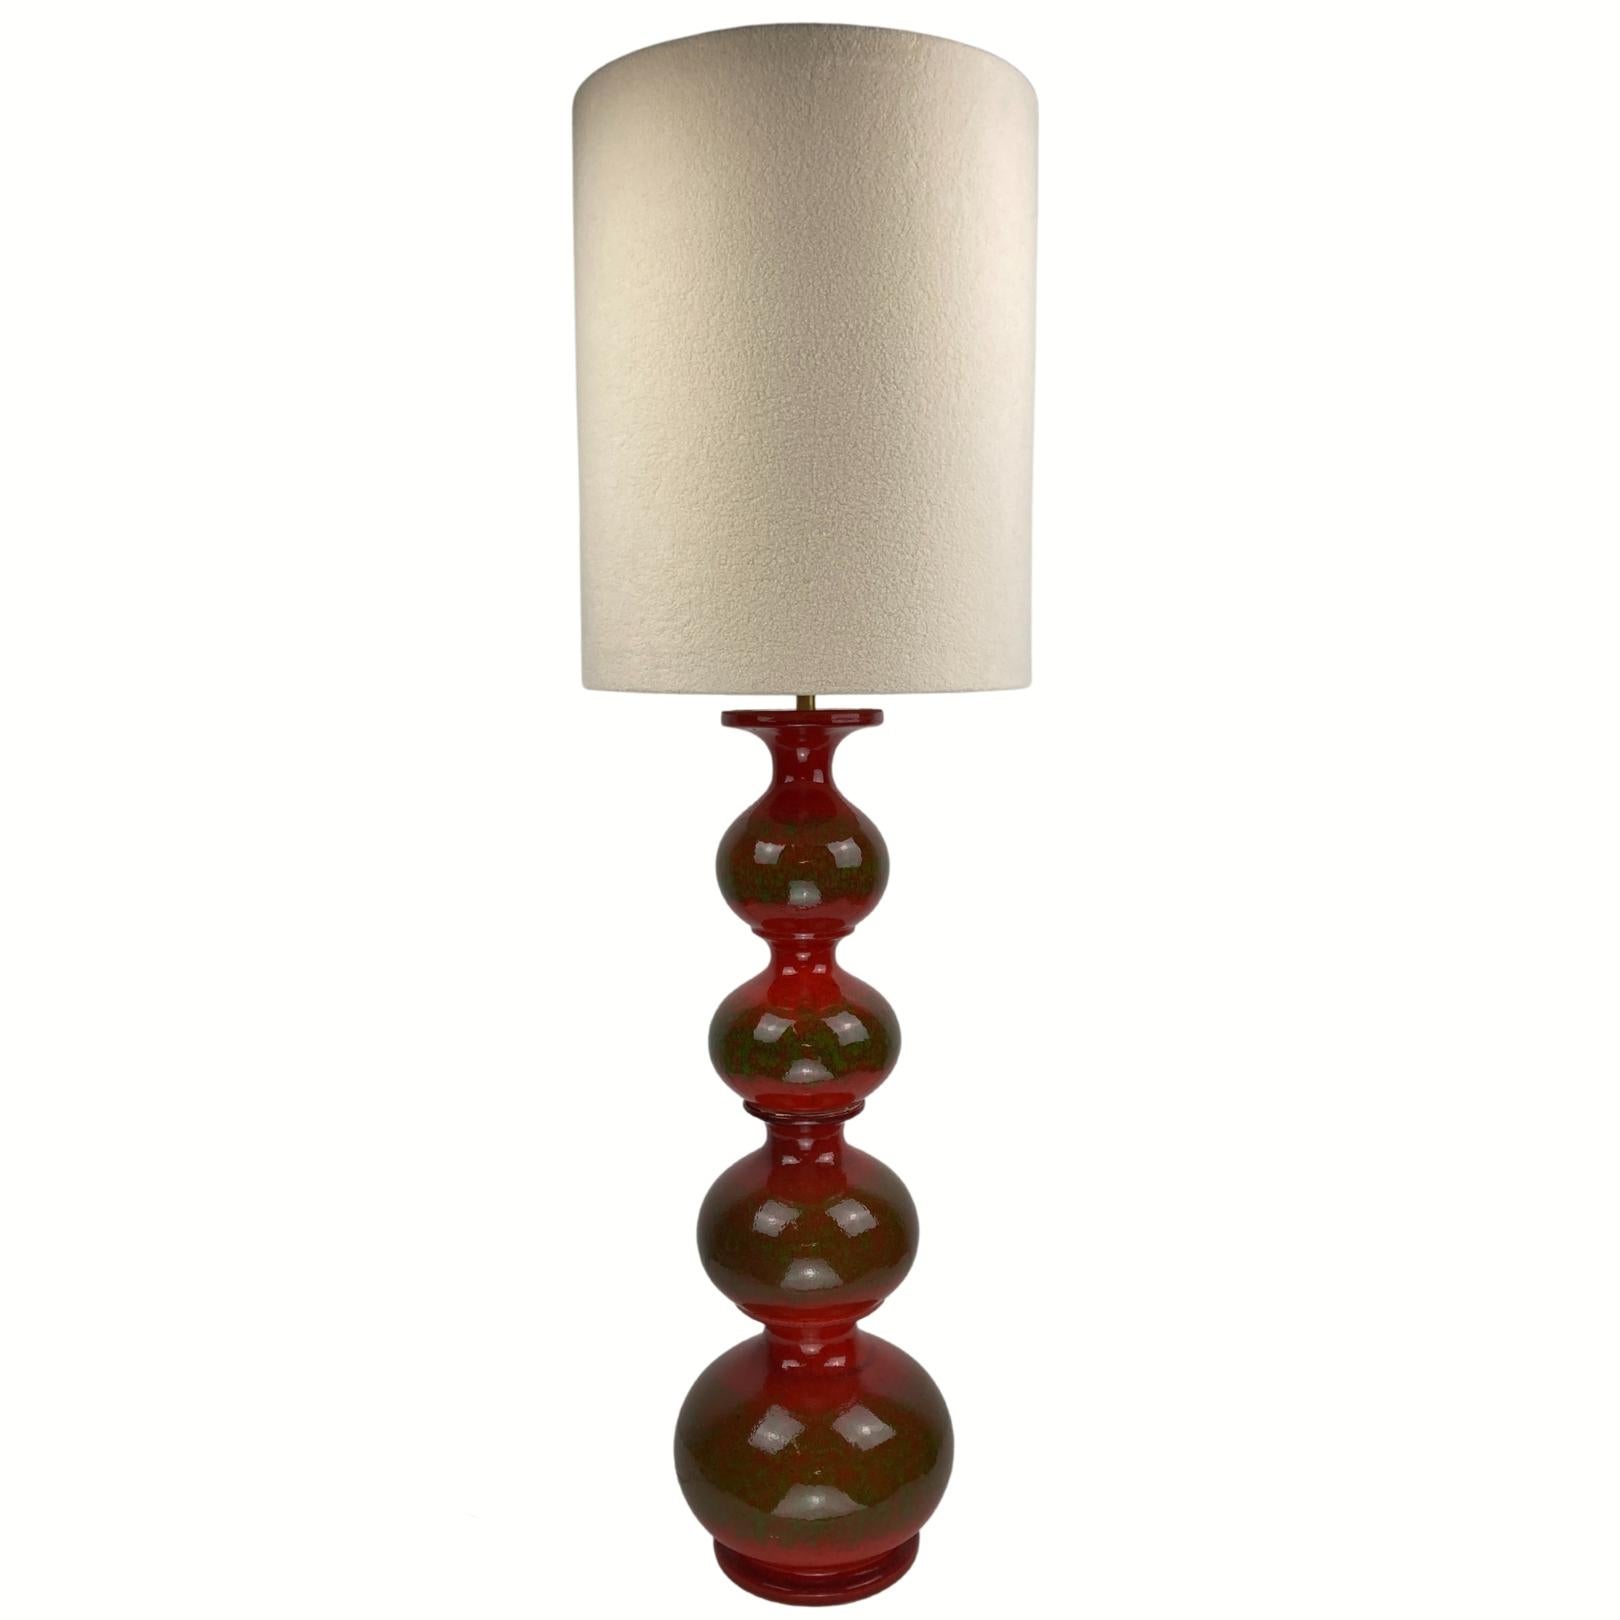 Ceramic bubbly wavy floor or table lamp by Kaiser Leuchten, 1960s For Sale 8